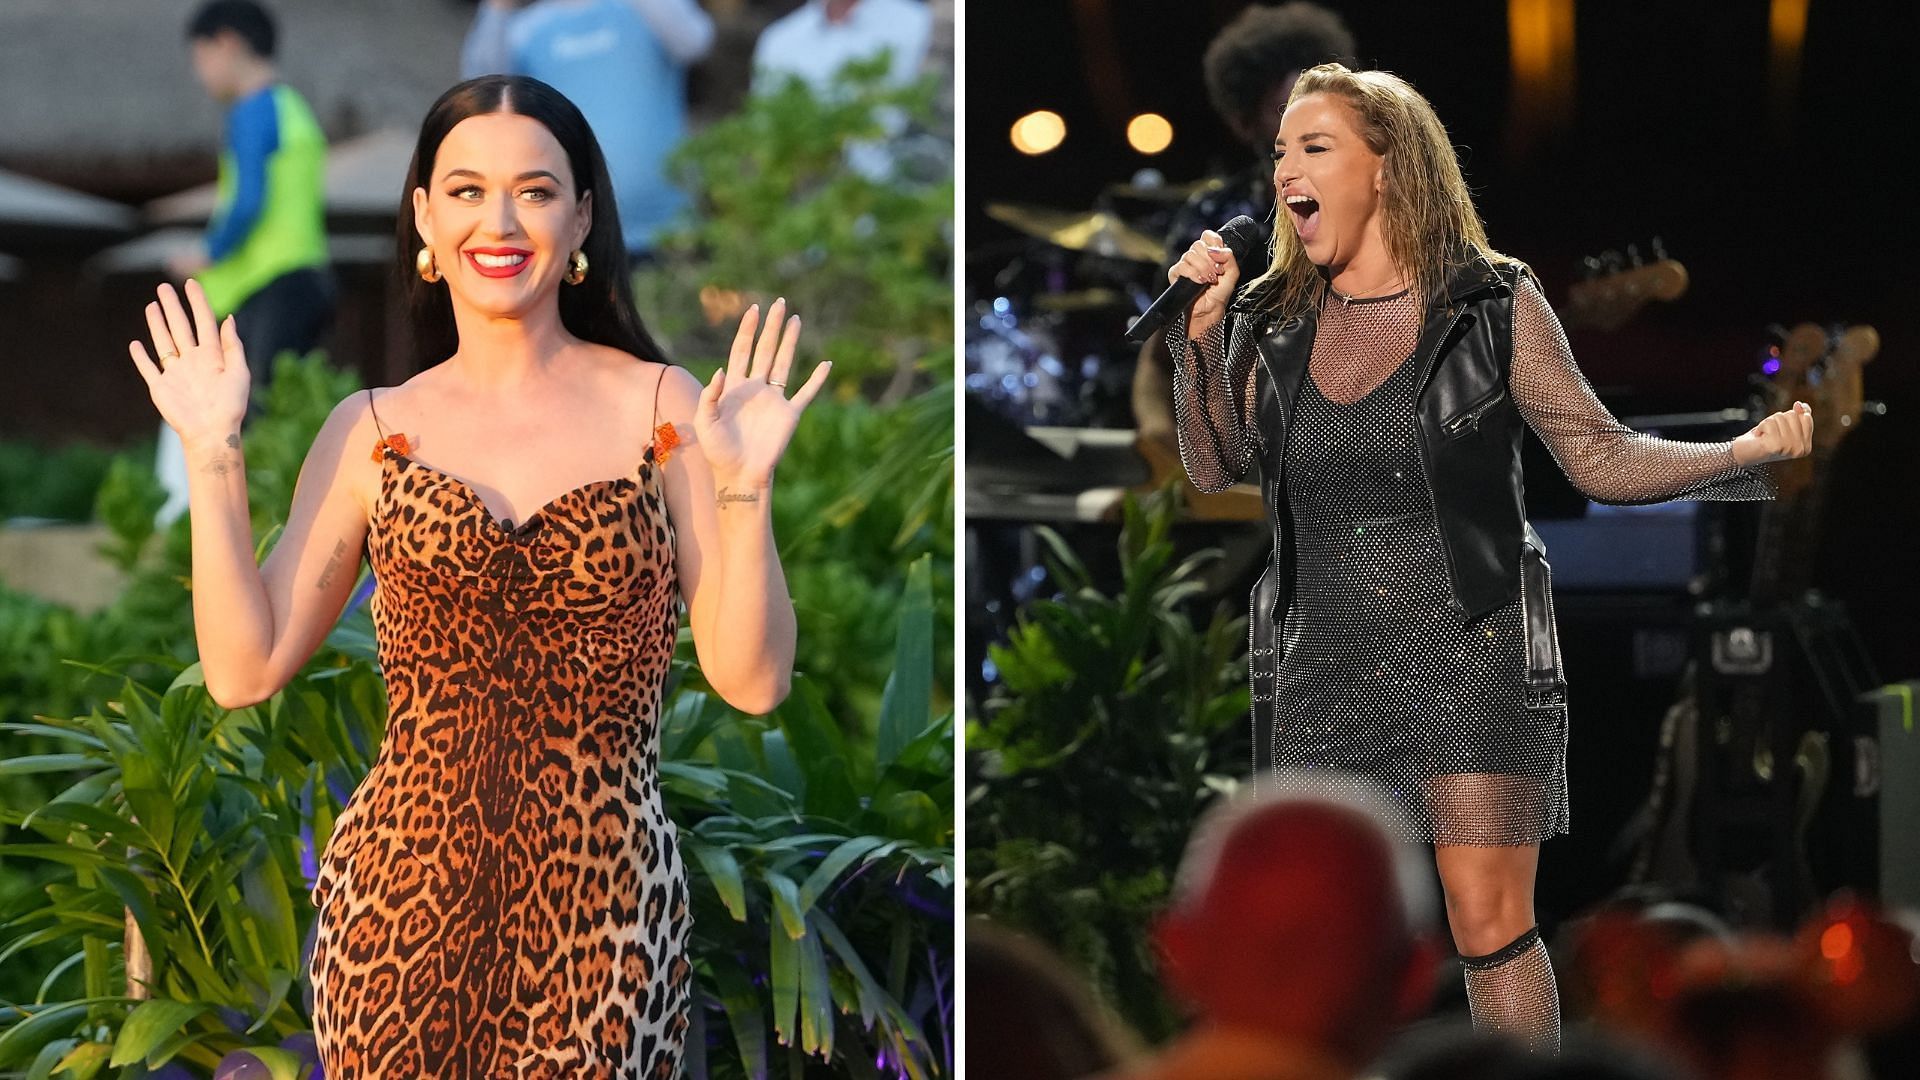 Katy Perry gets booed because of her comments towards Nutsa on American Idol